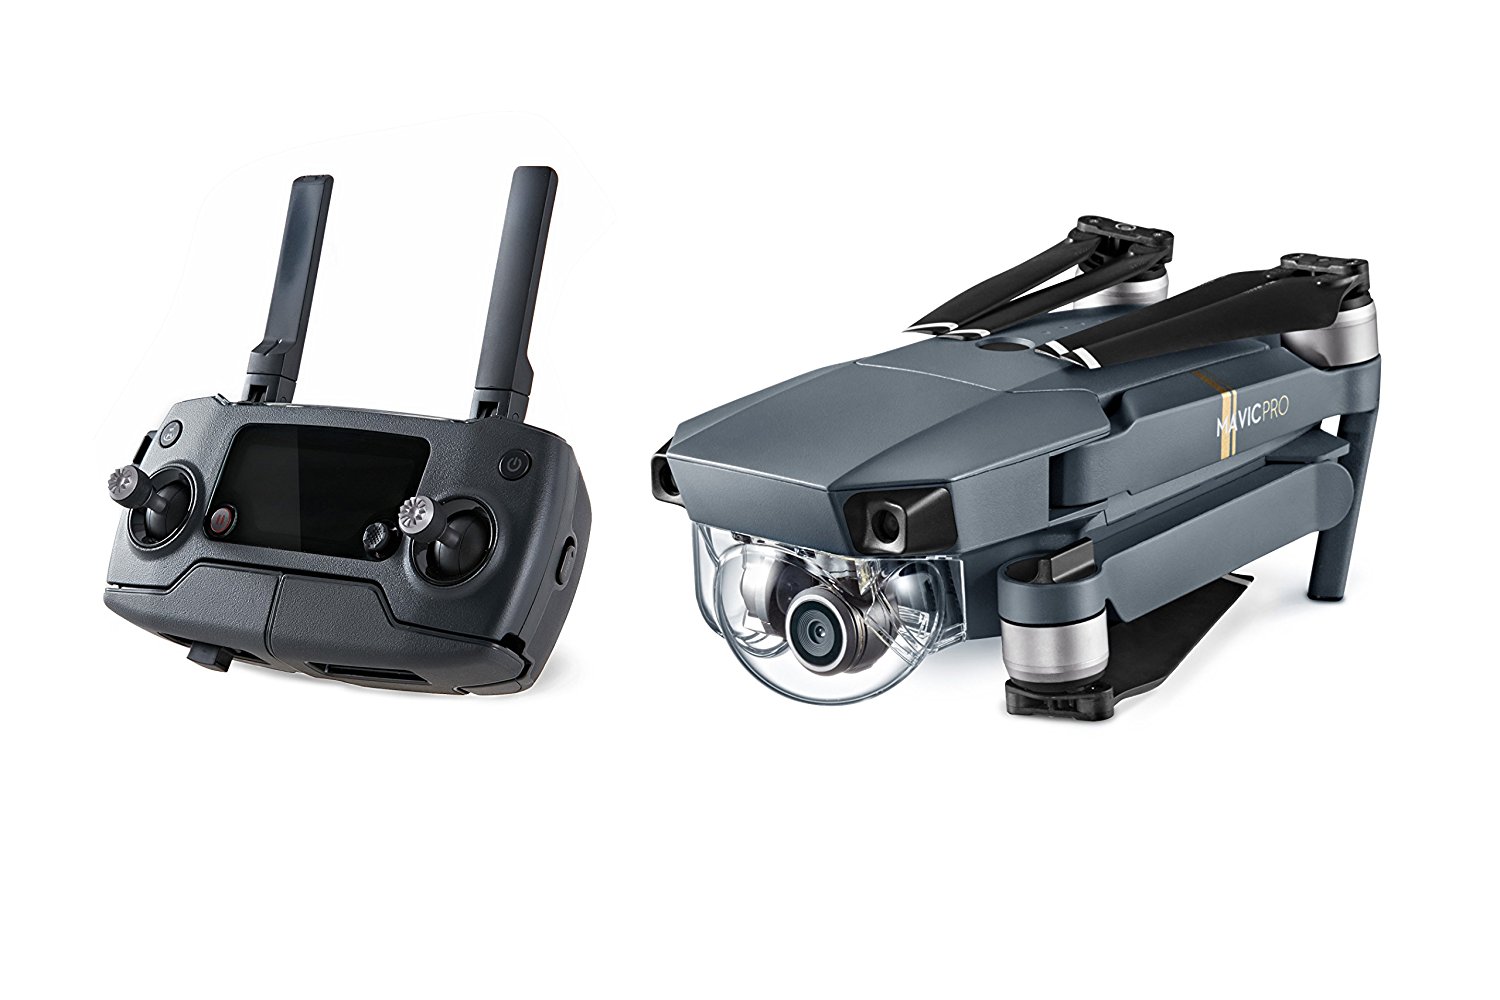 DJI Mavic Pro with Foldable design, 27 minute flight time Launched at $999